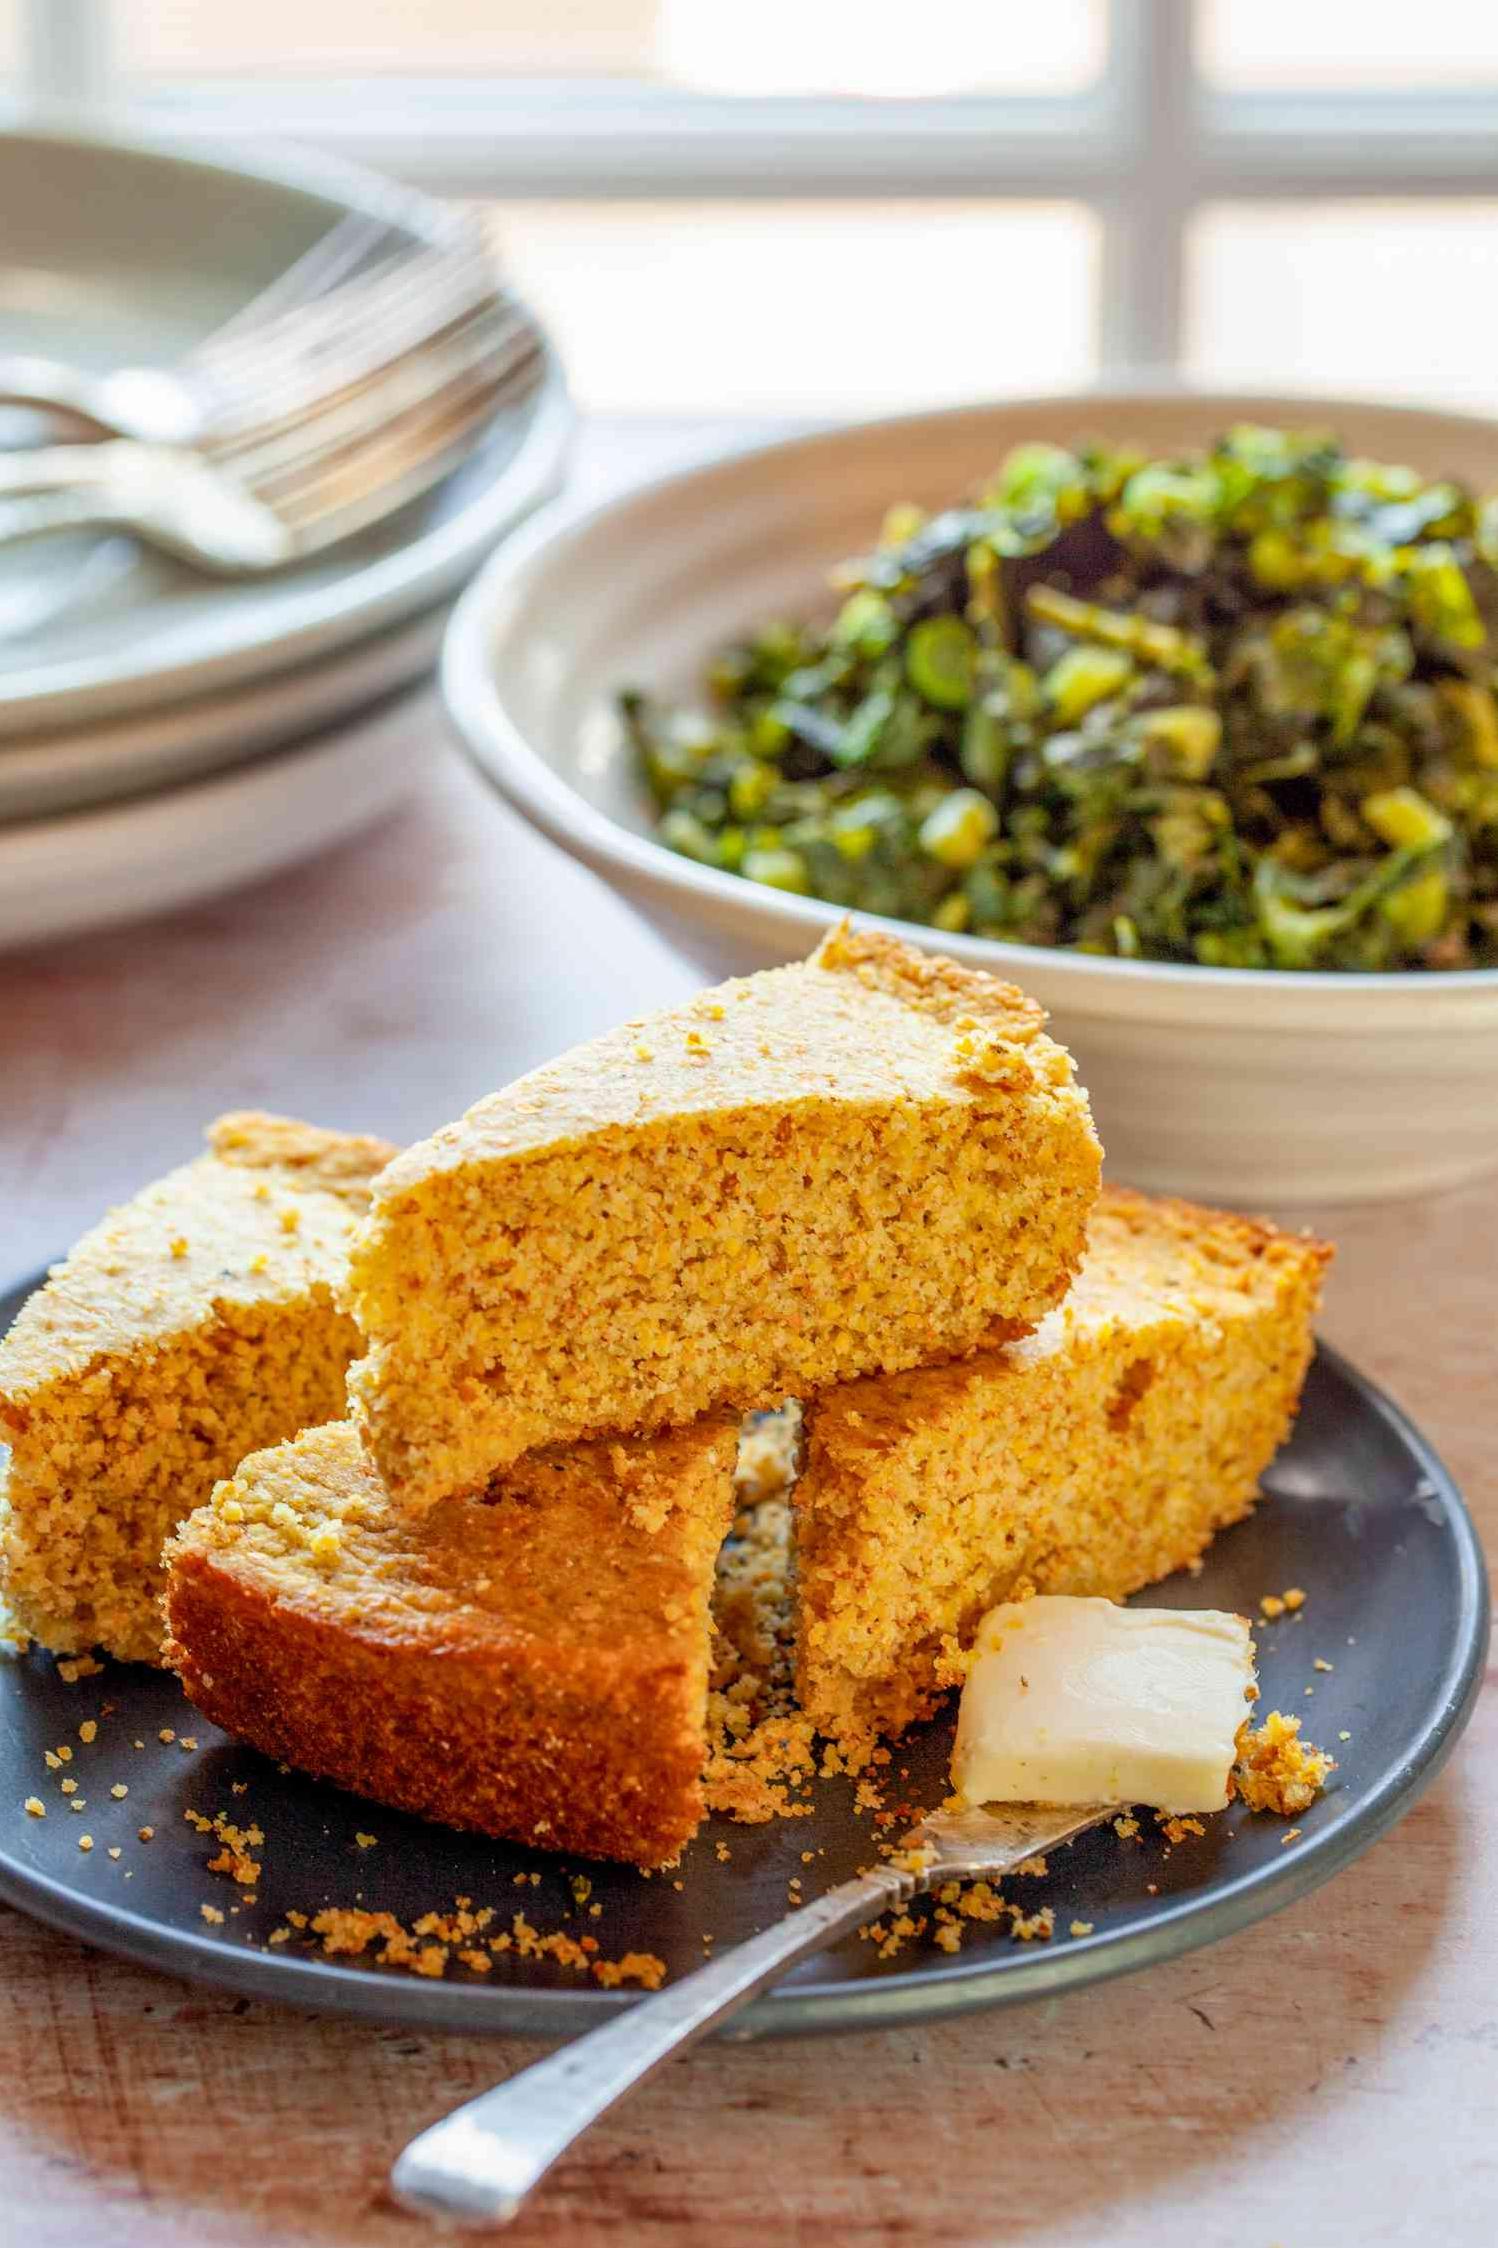  This recipe is easy as pie (or should we say, easy as cornbread?).